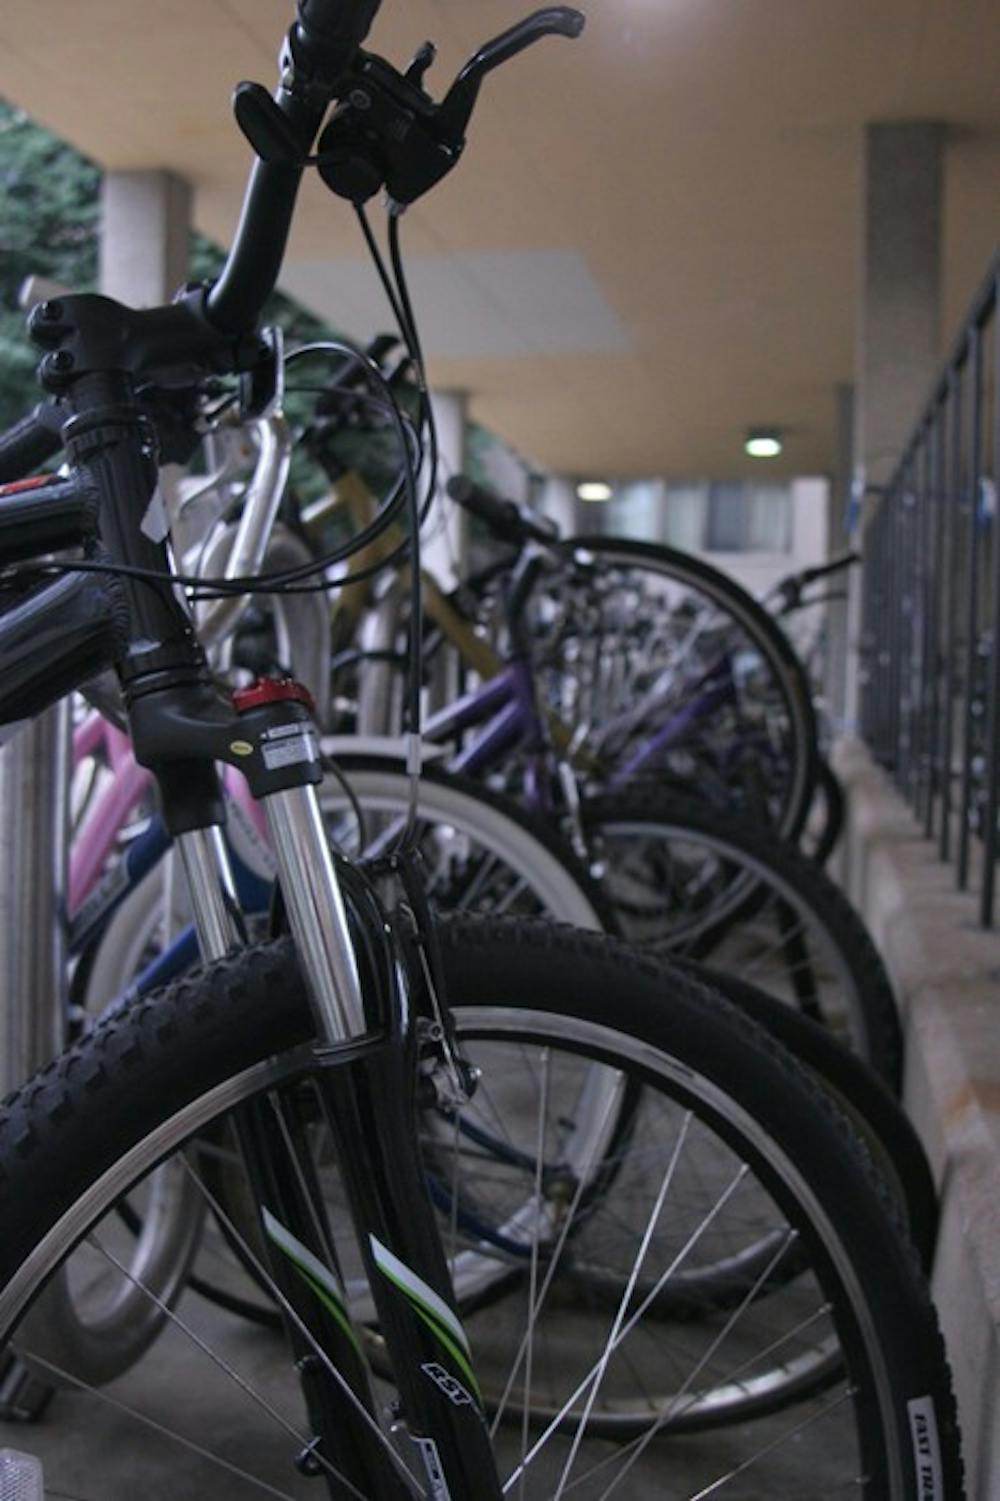 DOWN TO THE WIRE â€” This semester, about 20 bikes have been stolen from campus after their locks were cut. The thefts are thought to be the work of a group of youths who are also targeting other D.C. communities, according to Public Safety Director Chief Michael McNair.